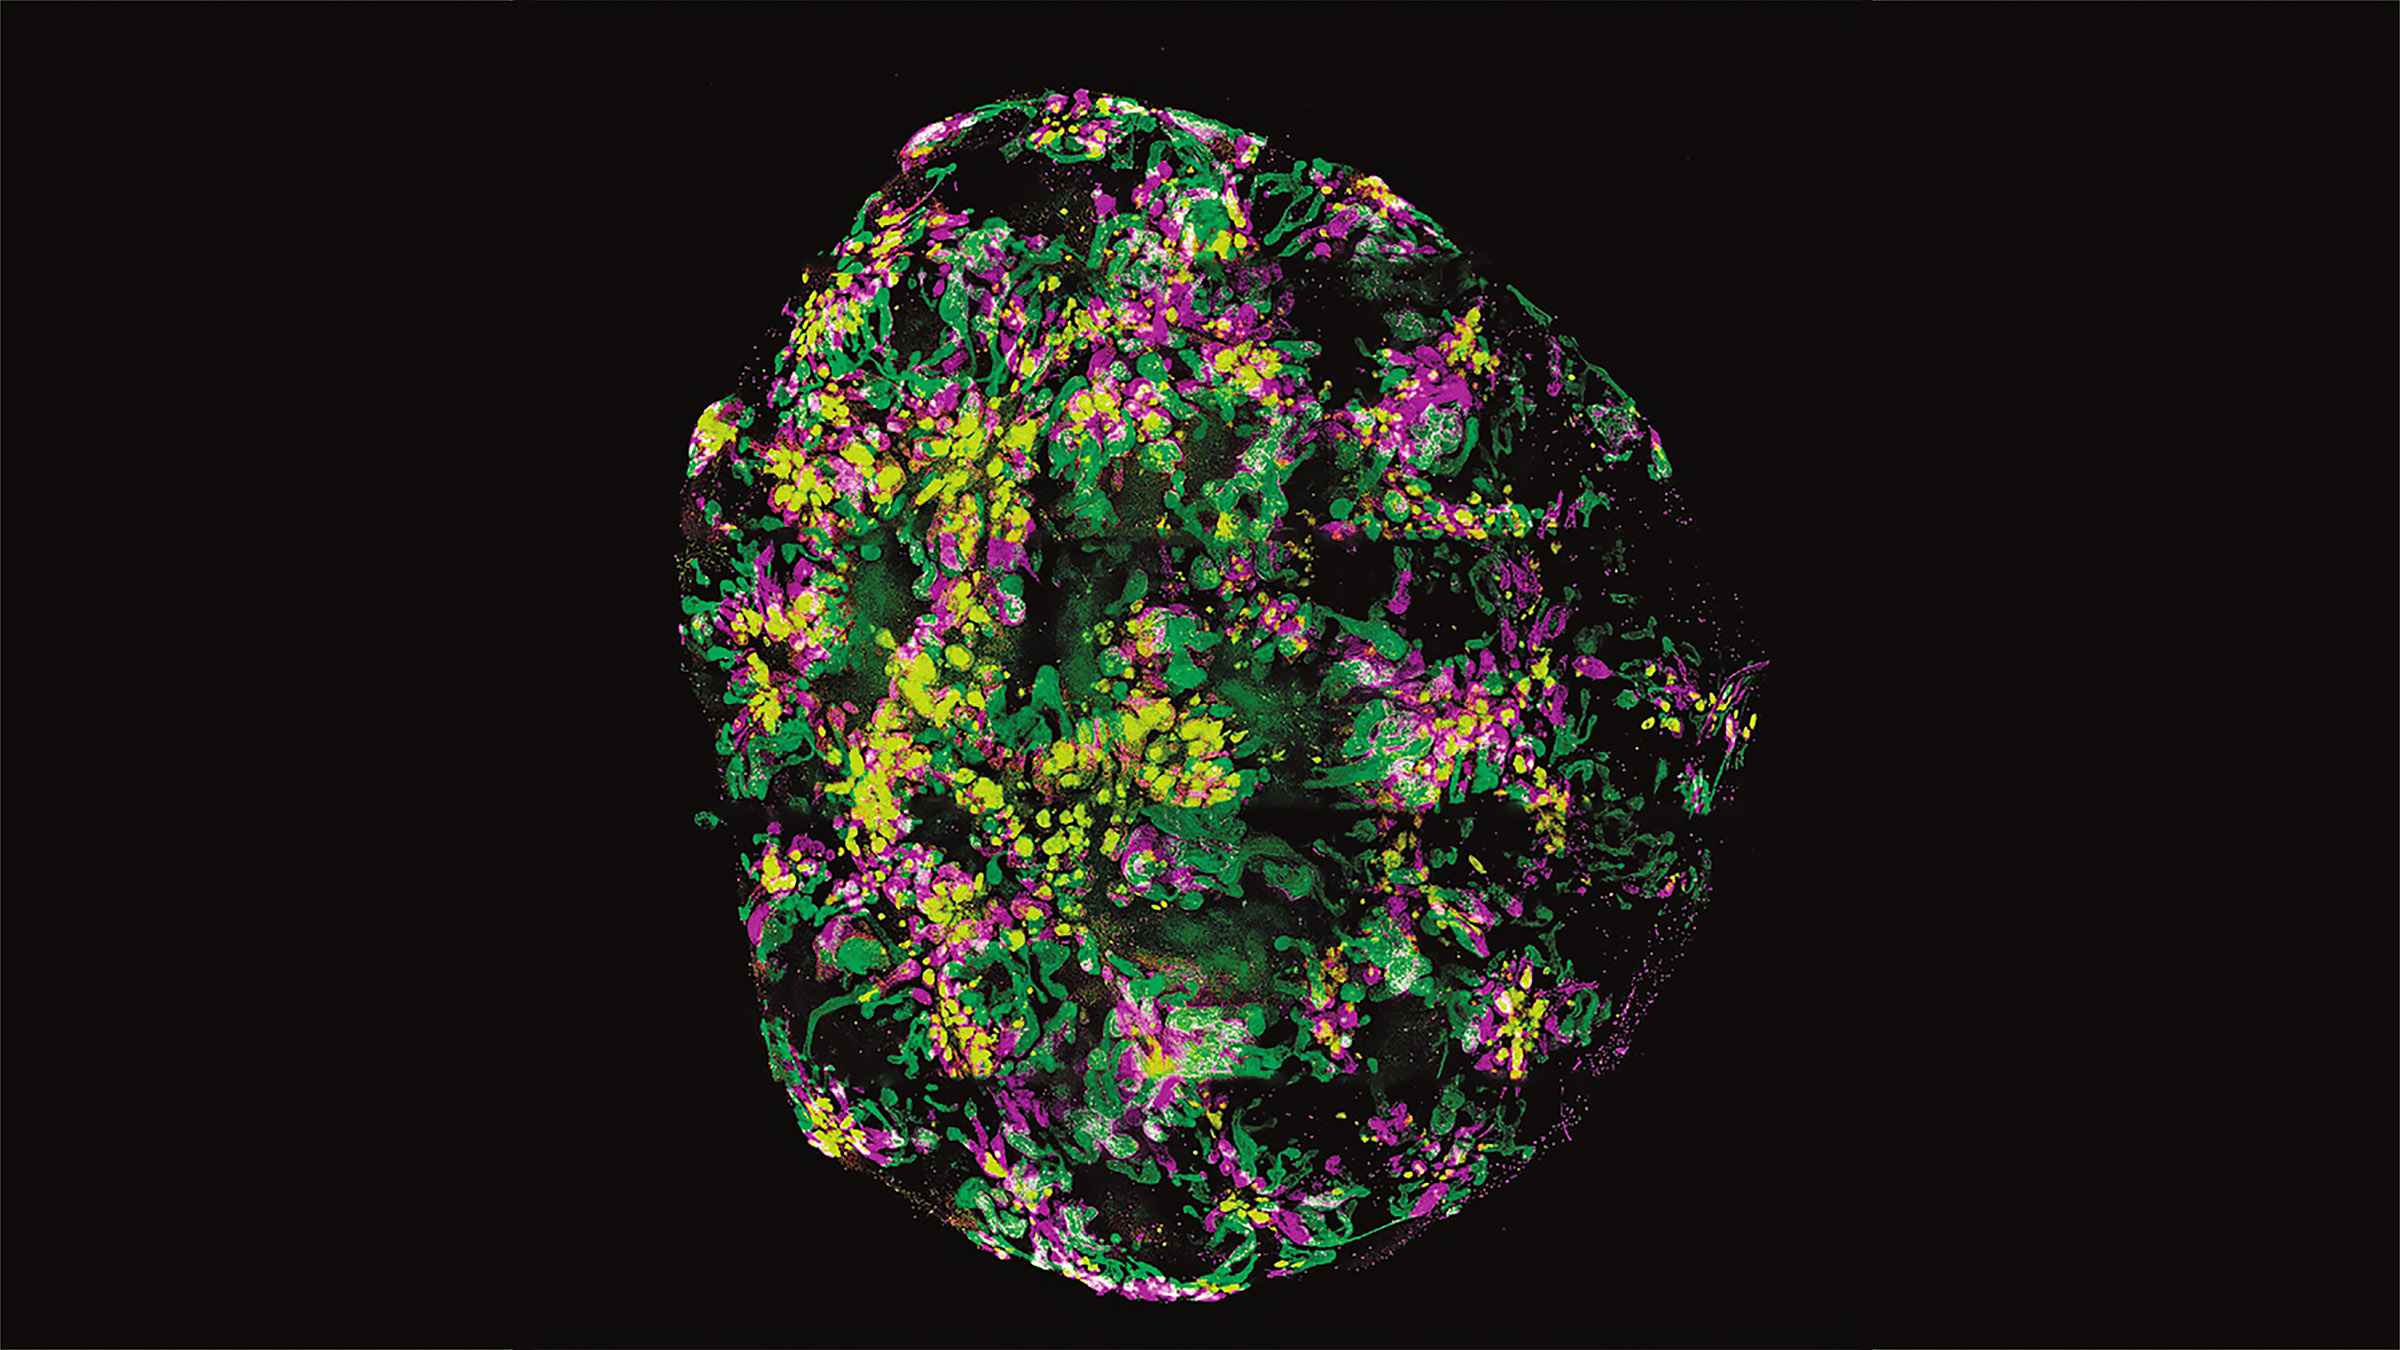 A kidney organoid generated from a human pluripotent stem cell